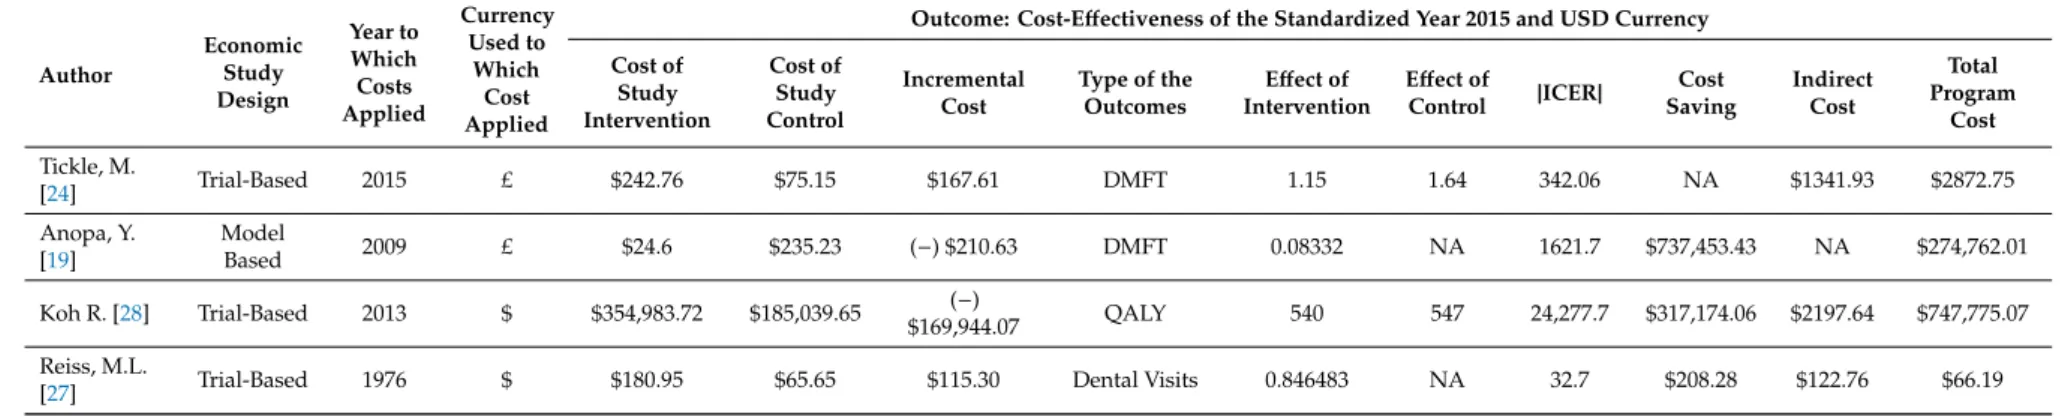 Table A2. Cost-Effectiveness Outcomes of the standardized included studies.